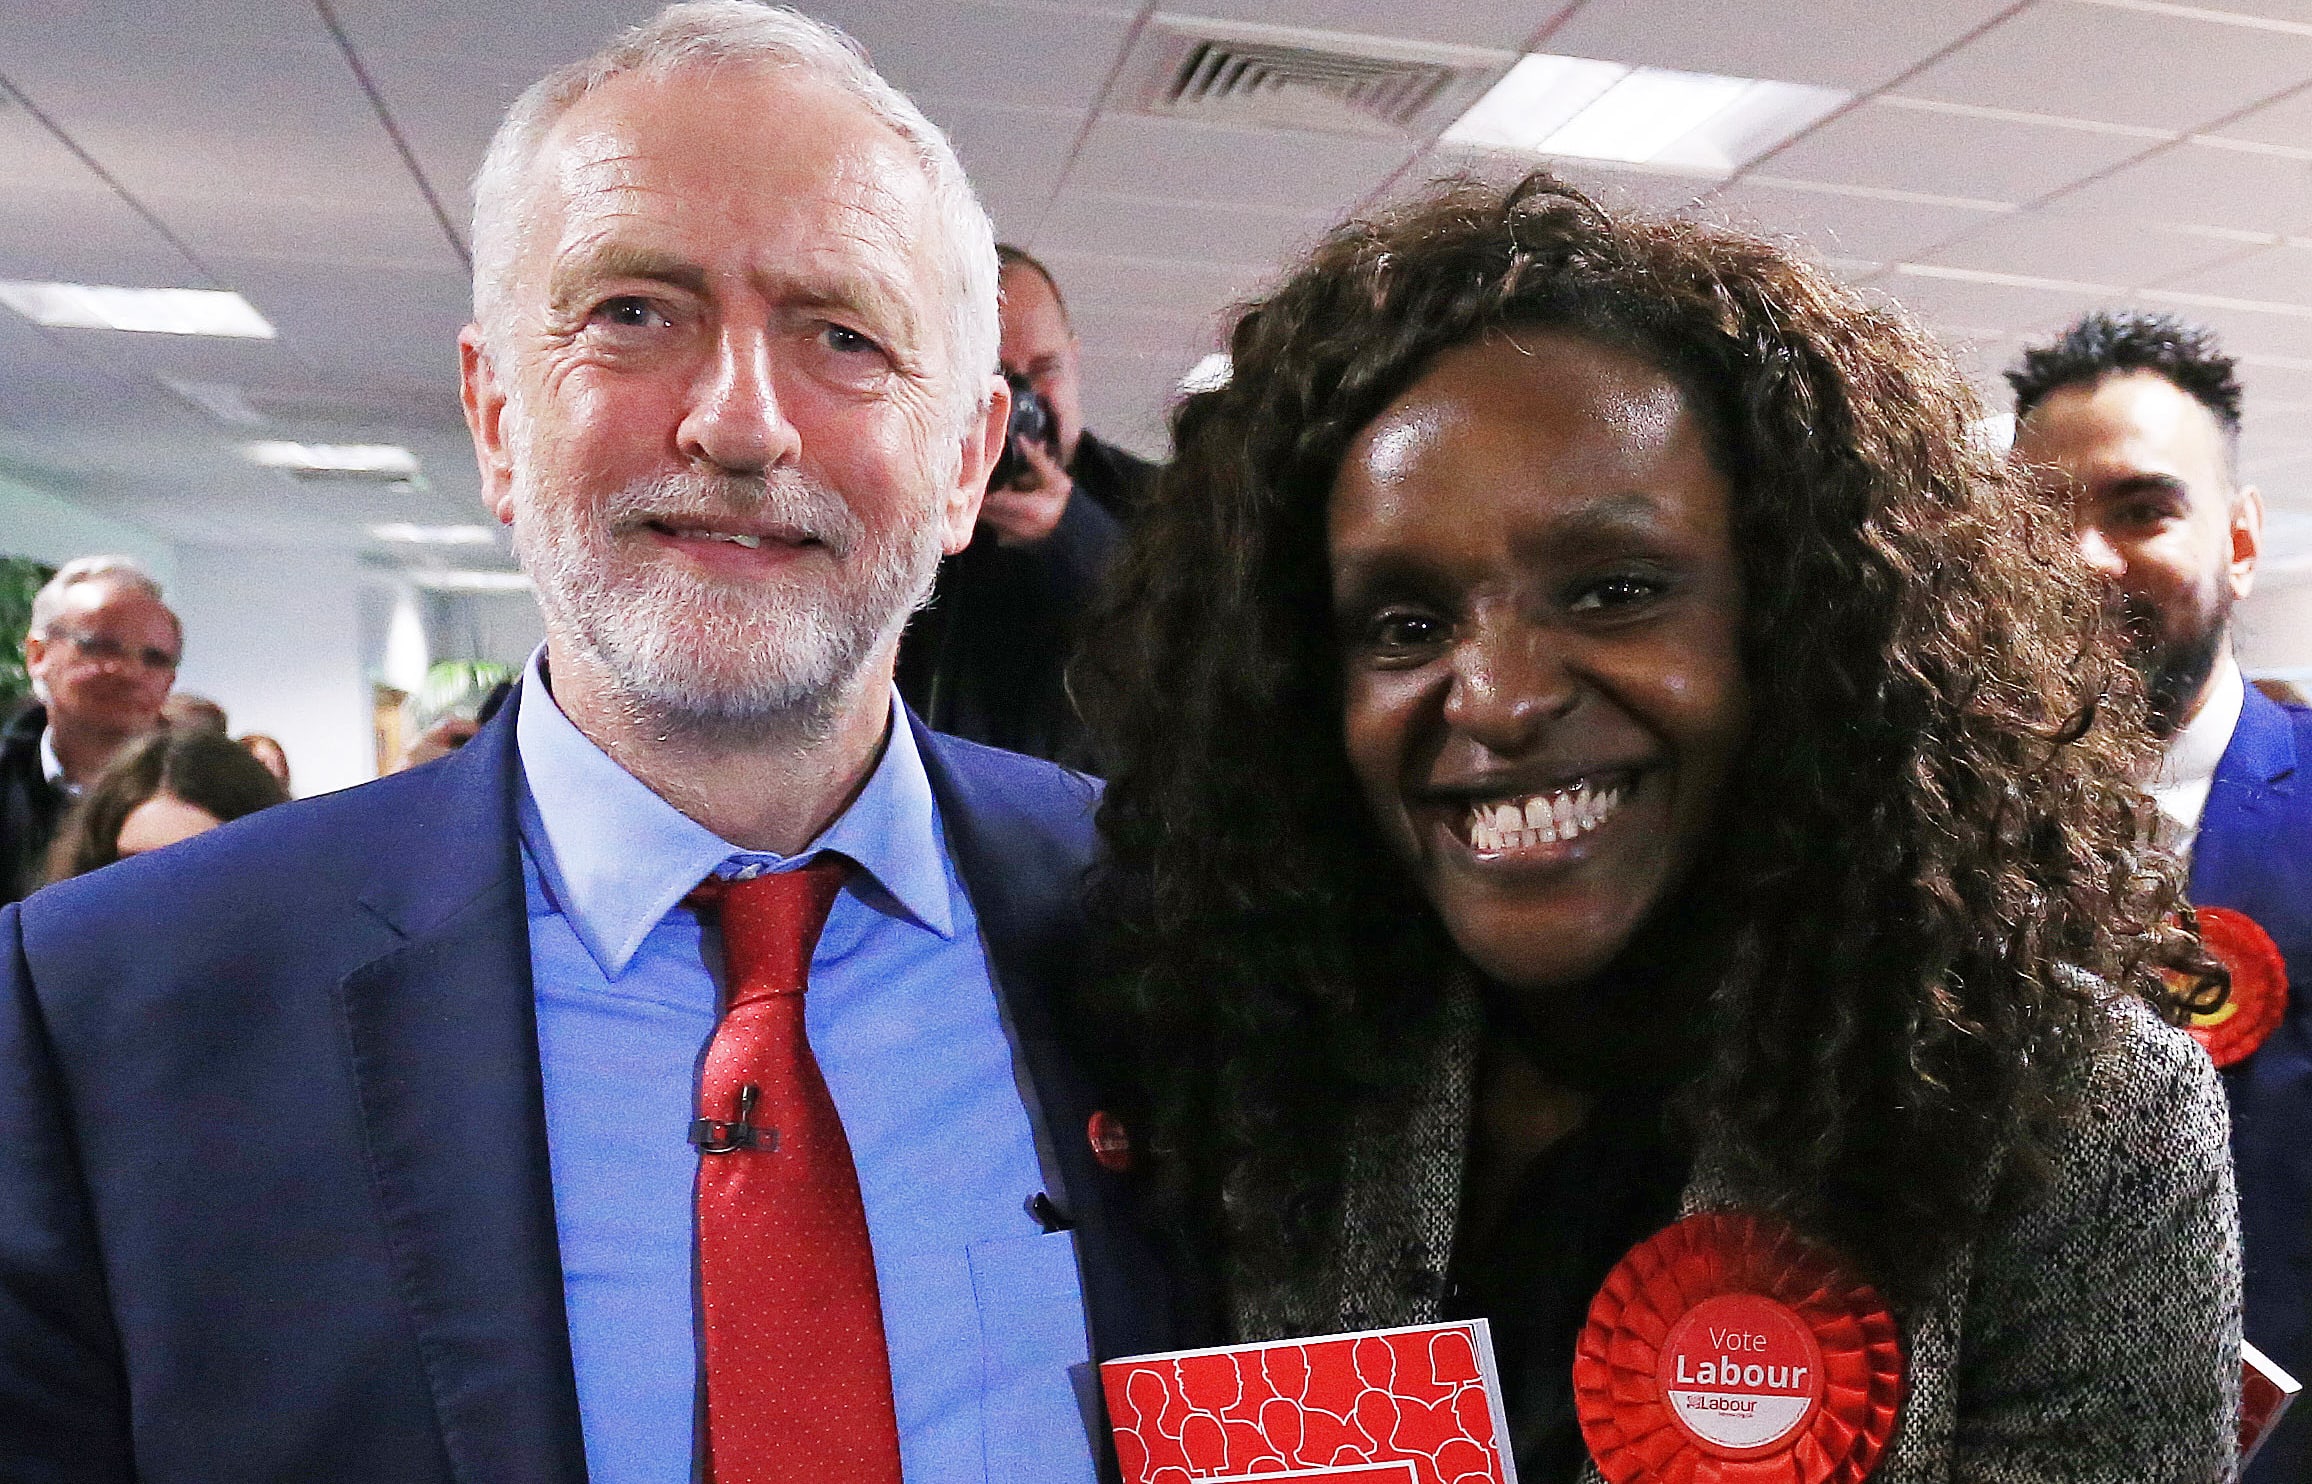 Leader of the Labour party Jeremy Corbyn poses for a photograph with Labour's Parliamentary Candidate for Peterborough, Fiona Onasanya (R) after making a speech, at Peterborough Football Club in Peterborough, central England on May 19, 2017.